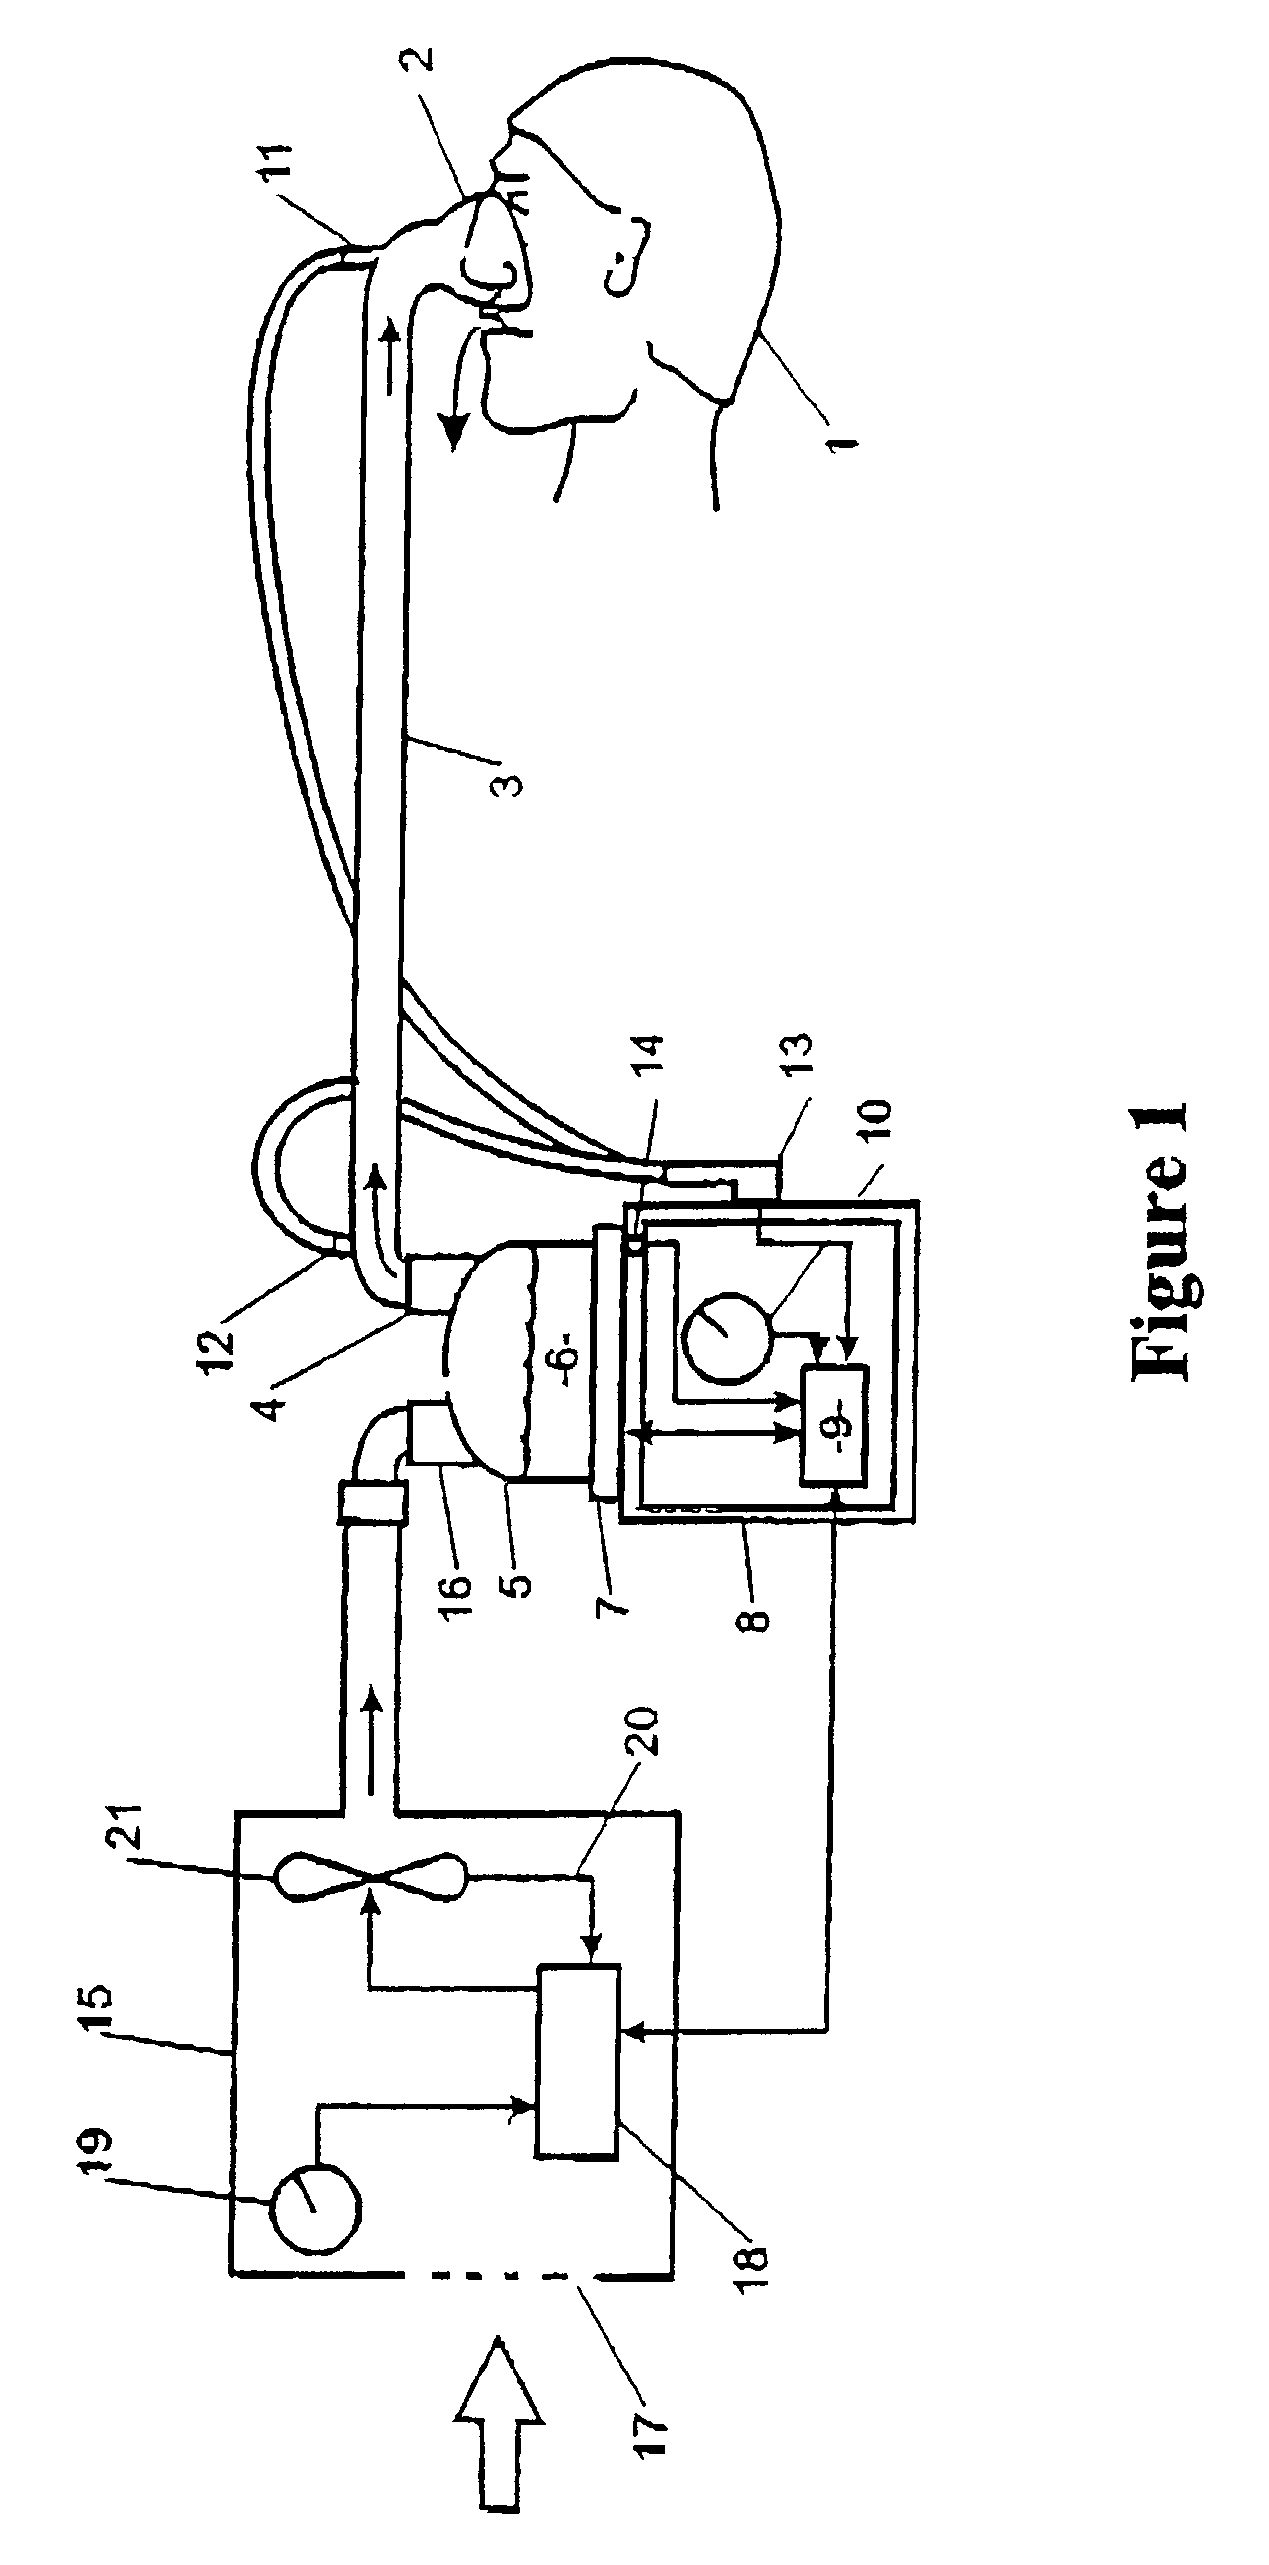 Method of forming a respiratory conduit